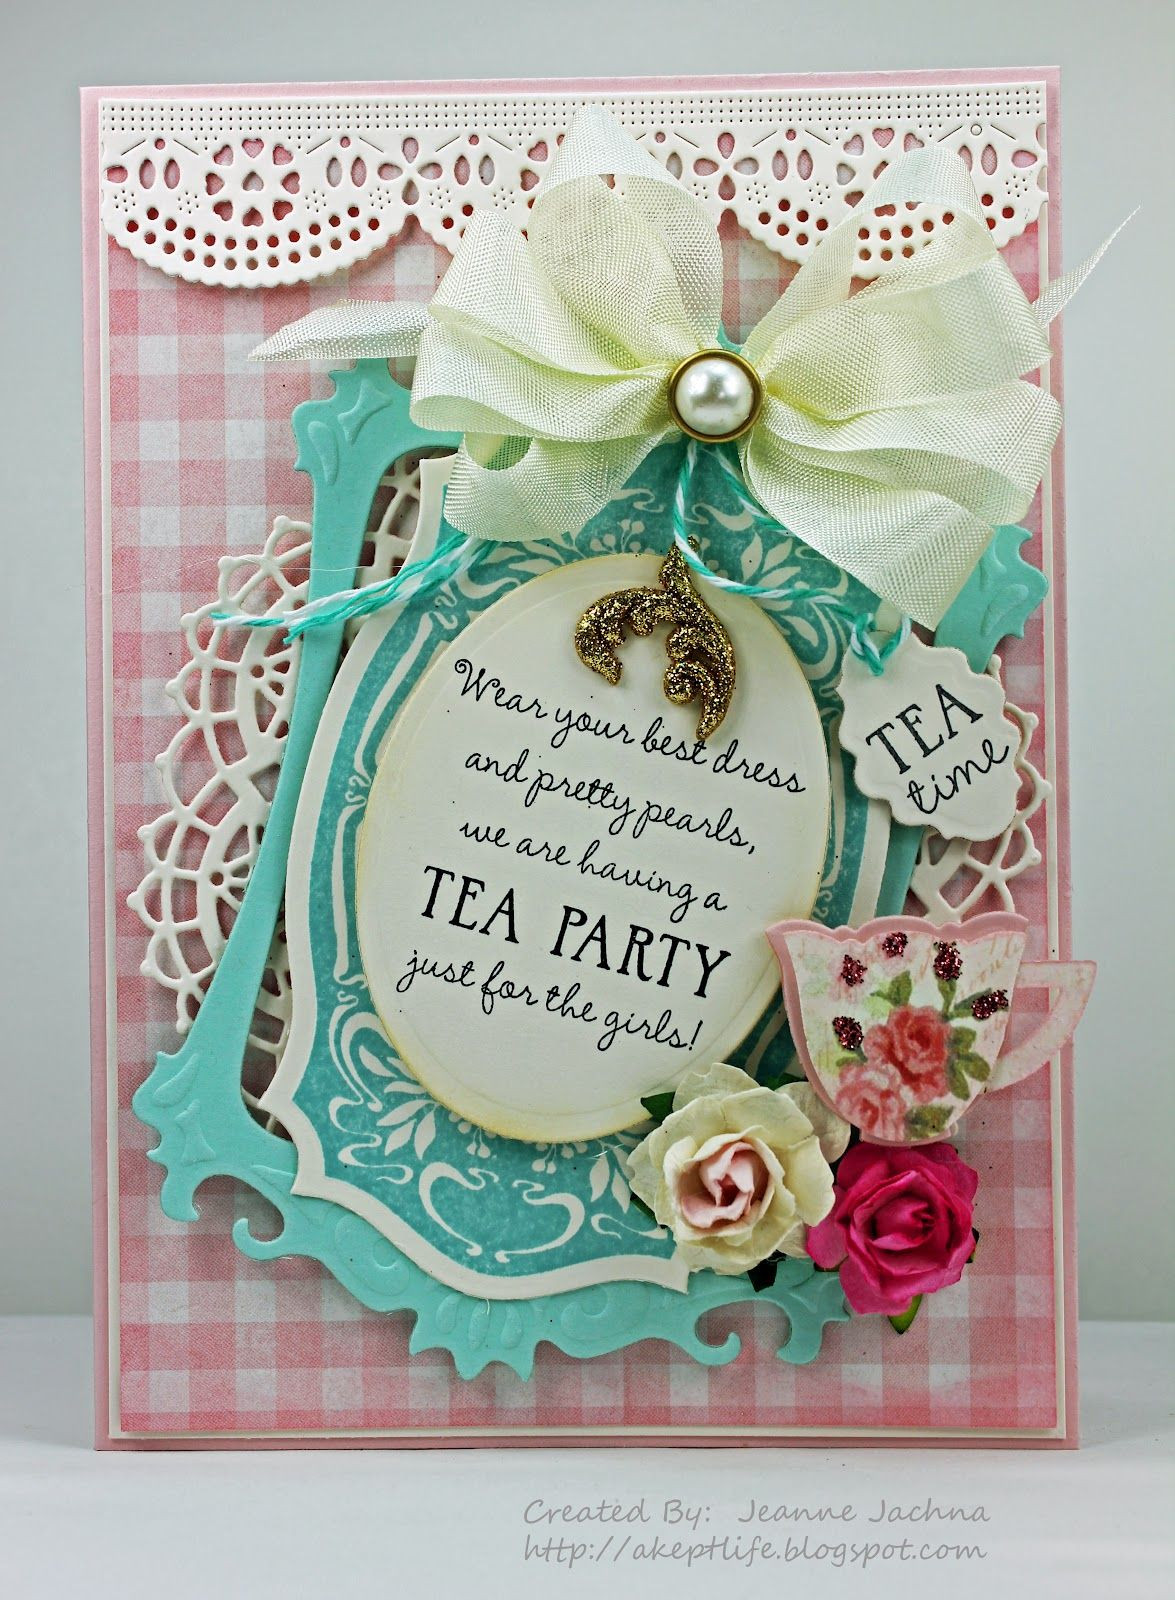 Tea Party Invite Ideas
 3D Tea Party Invitations With White Ribbon And Red Rose on